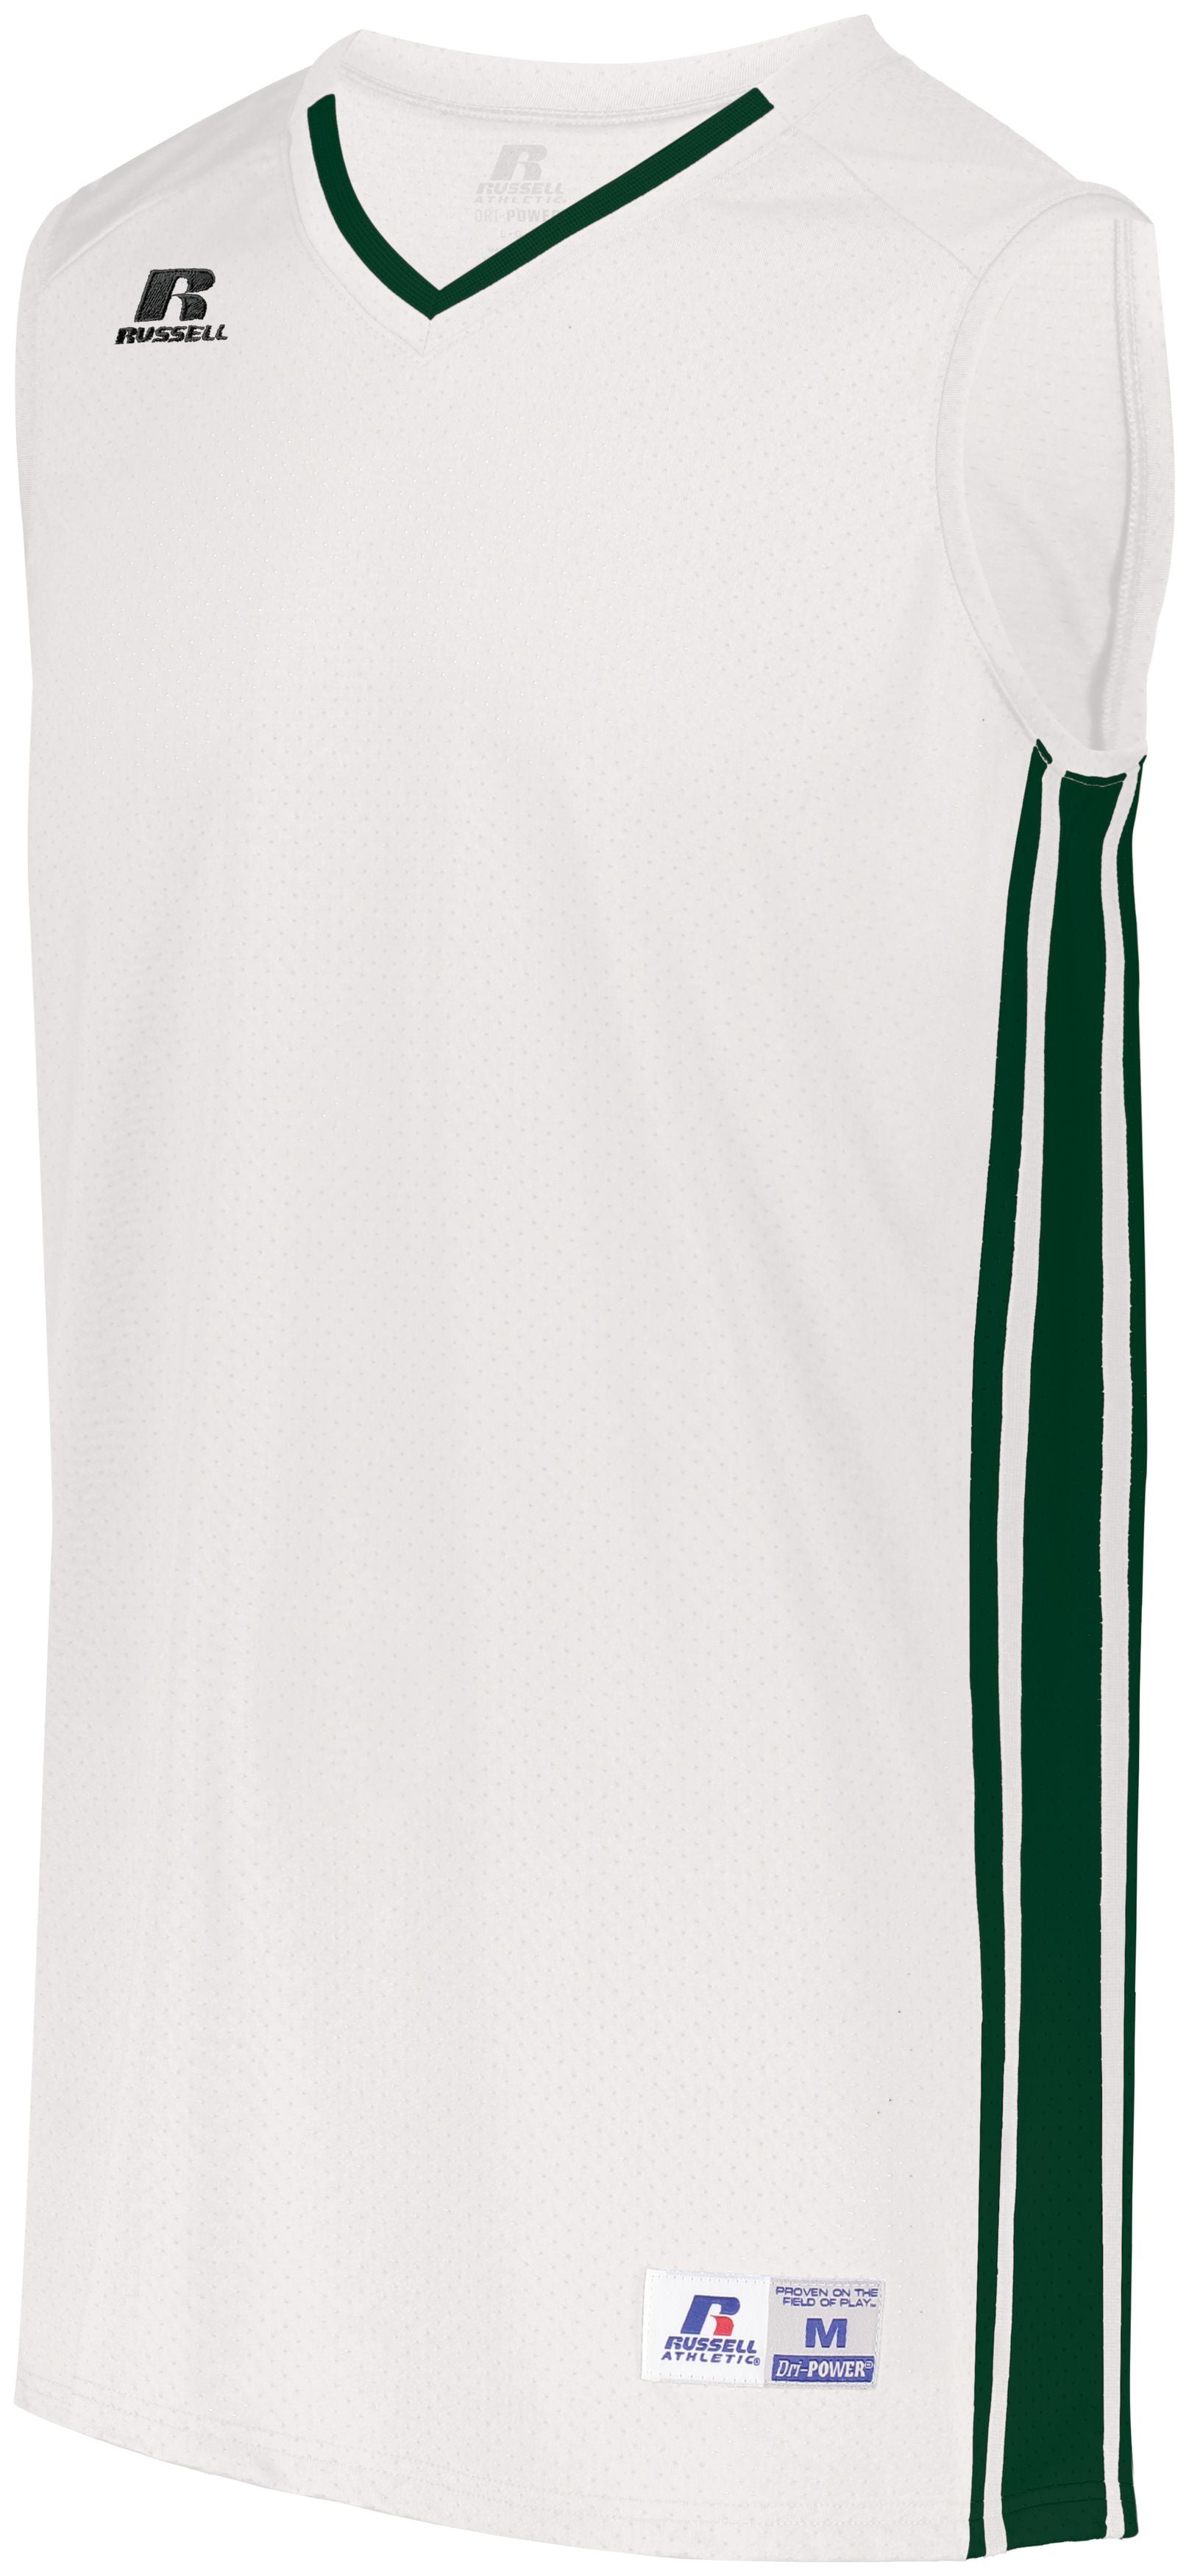 Russell Athletic Legacy Basketball Jersey in White/Dark Green  -Part of the Adult, Adult-Jersey, Basketball, Russell-Athletic-Products, Shirts, All-Sports, All-Sports-1 product lines at KanaleyCreations.com